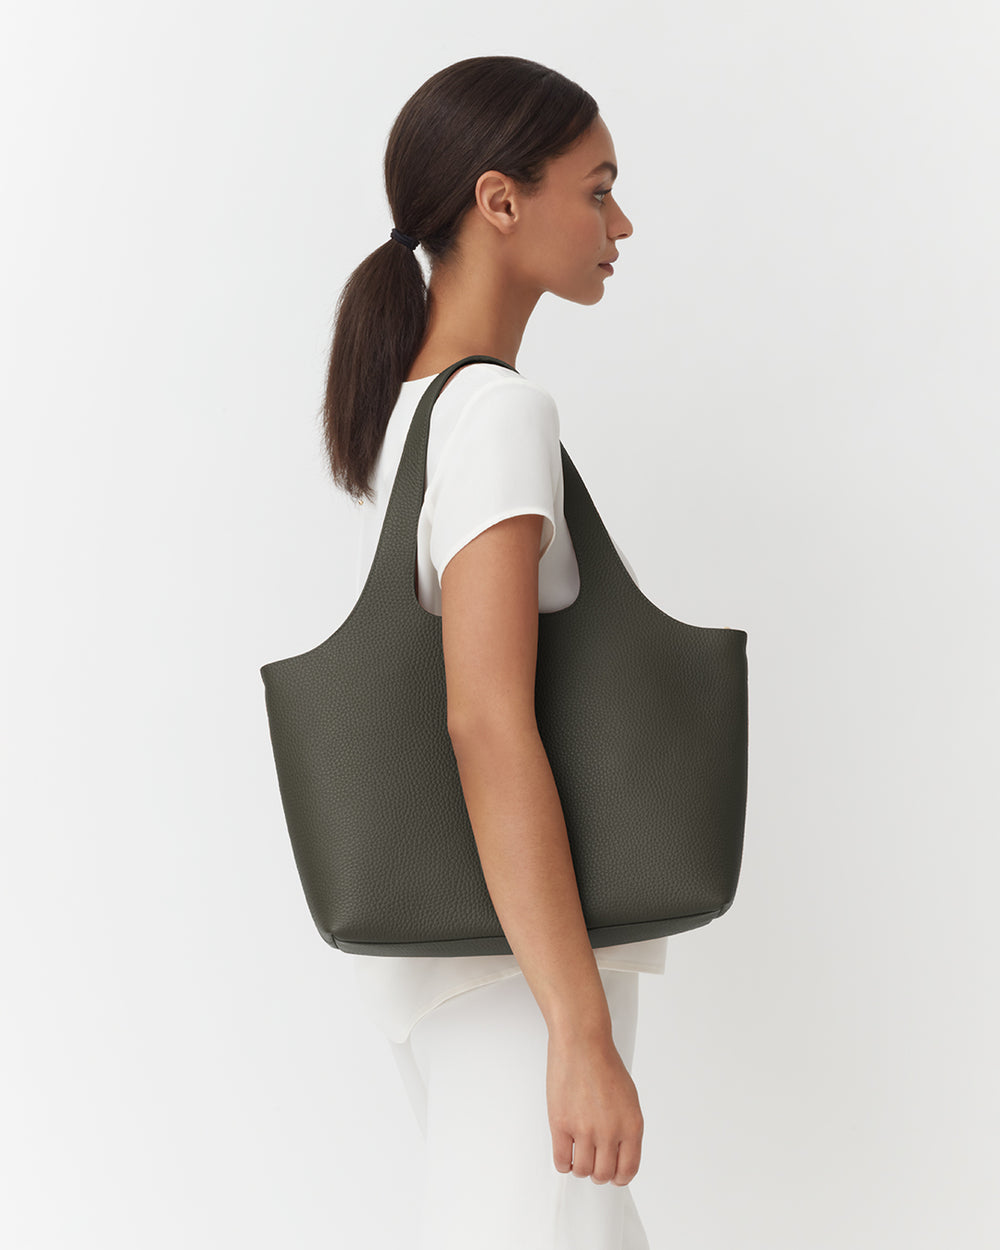 Woman with a ponytail carrying a large tote bag over her shoulder.